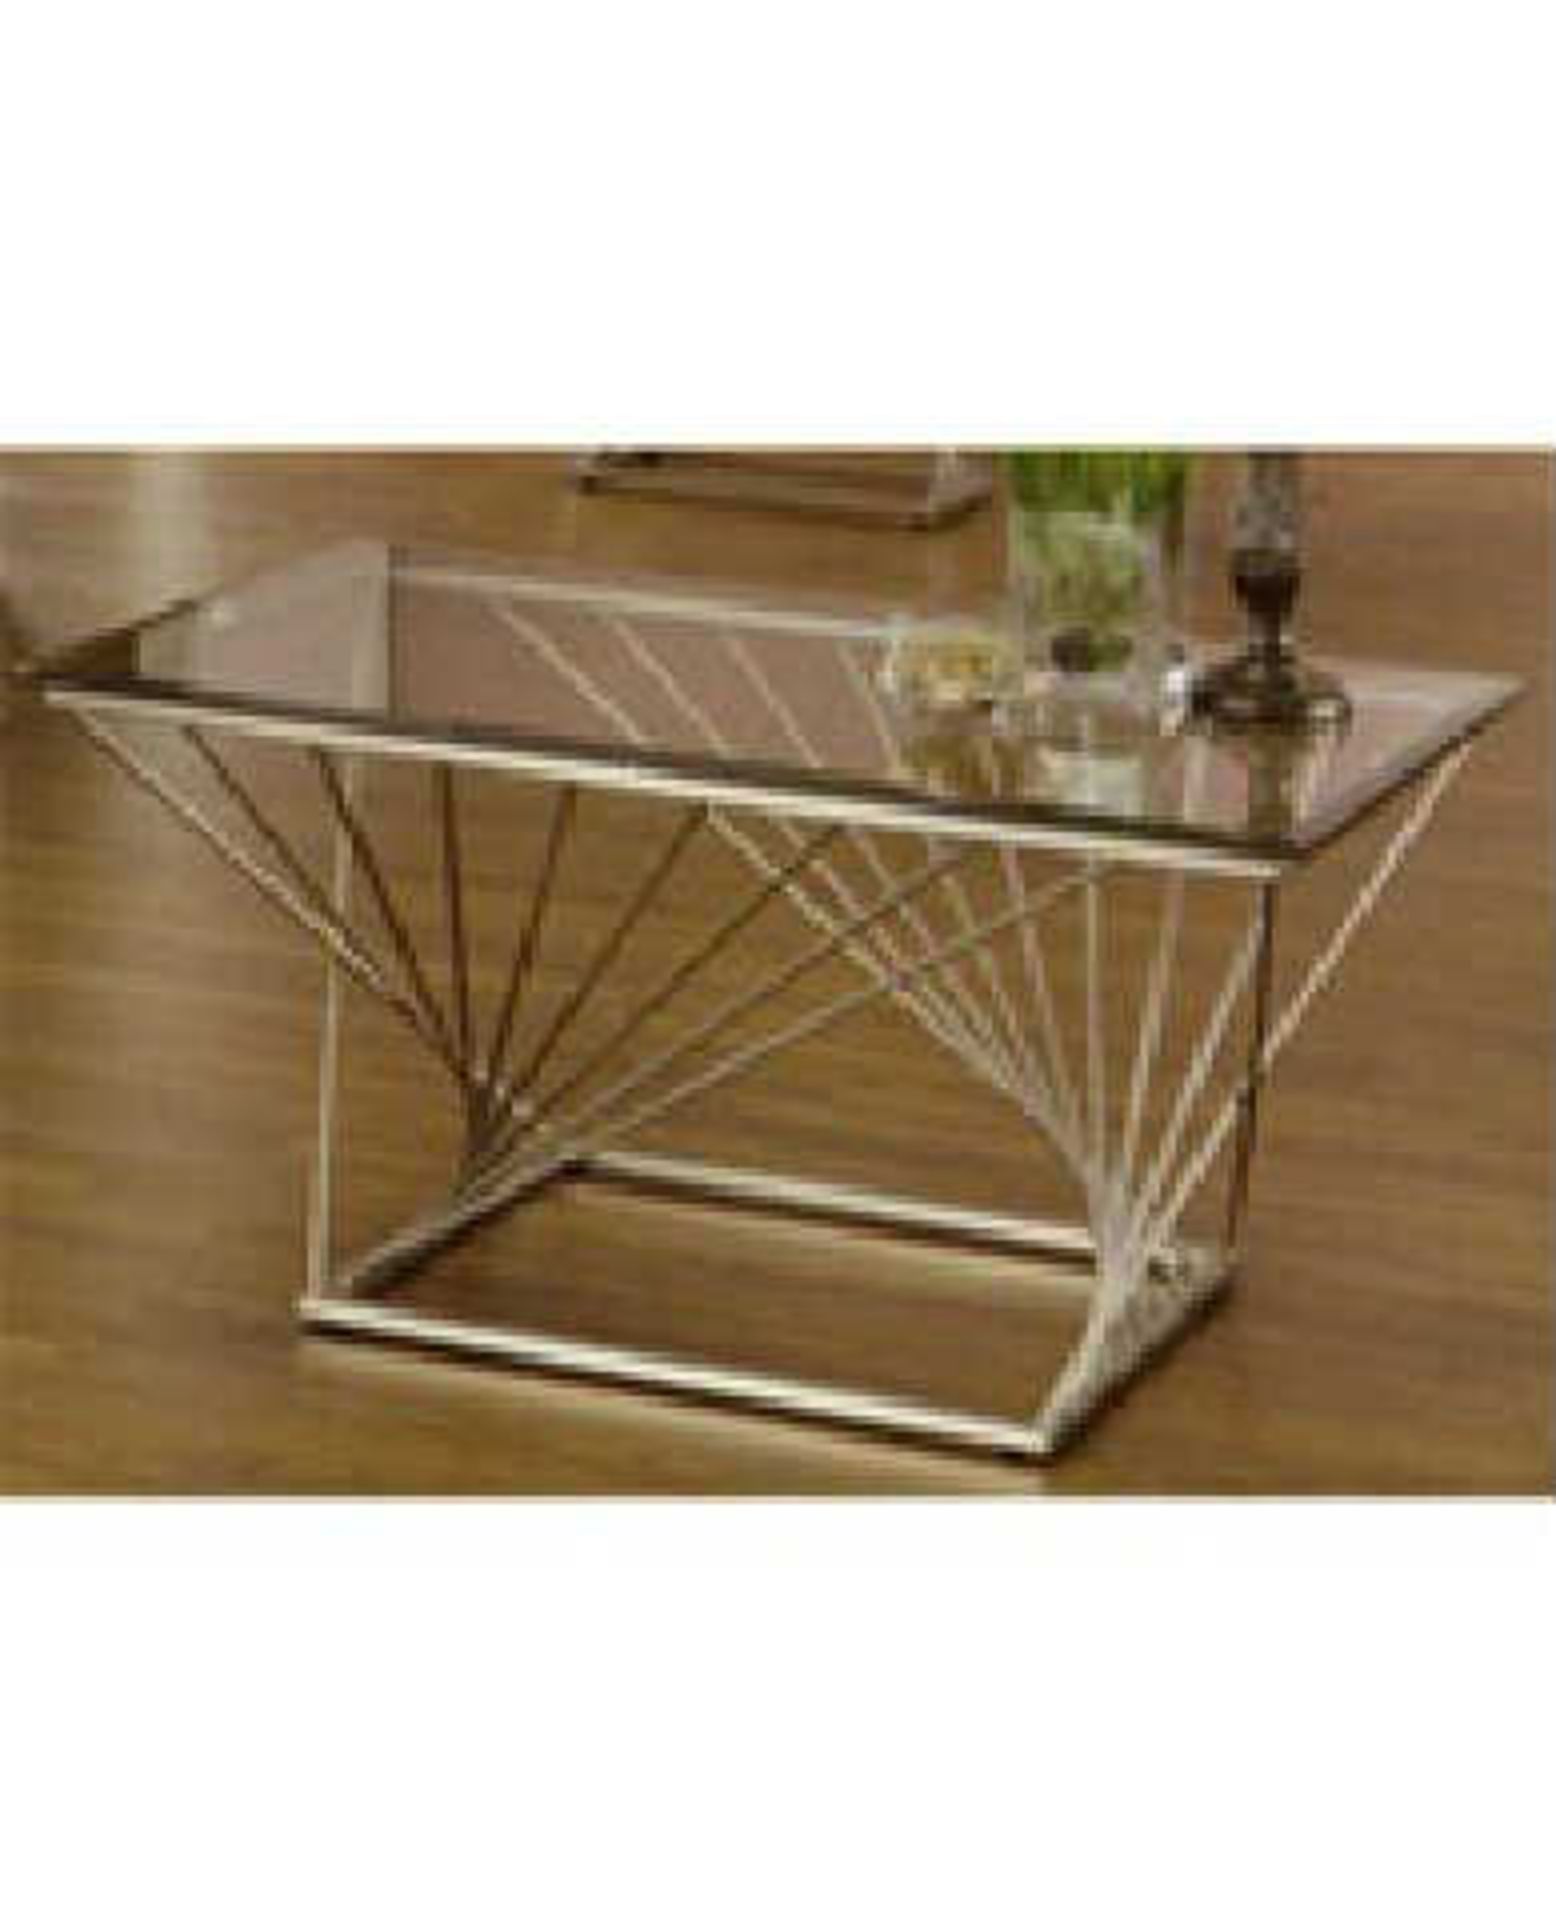 BRAND NEW BOXED DESIGNER BLOSSOM CLEAR GLASS CRYSTAL COFFEE TABLE RRP £99.95 (2 BOXES)